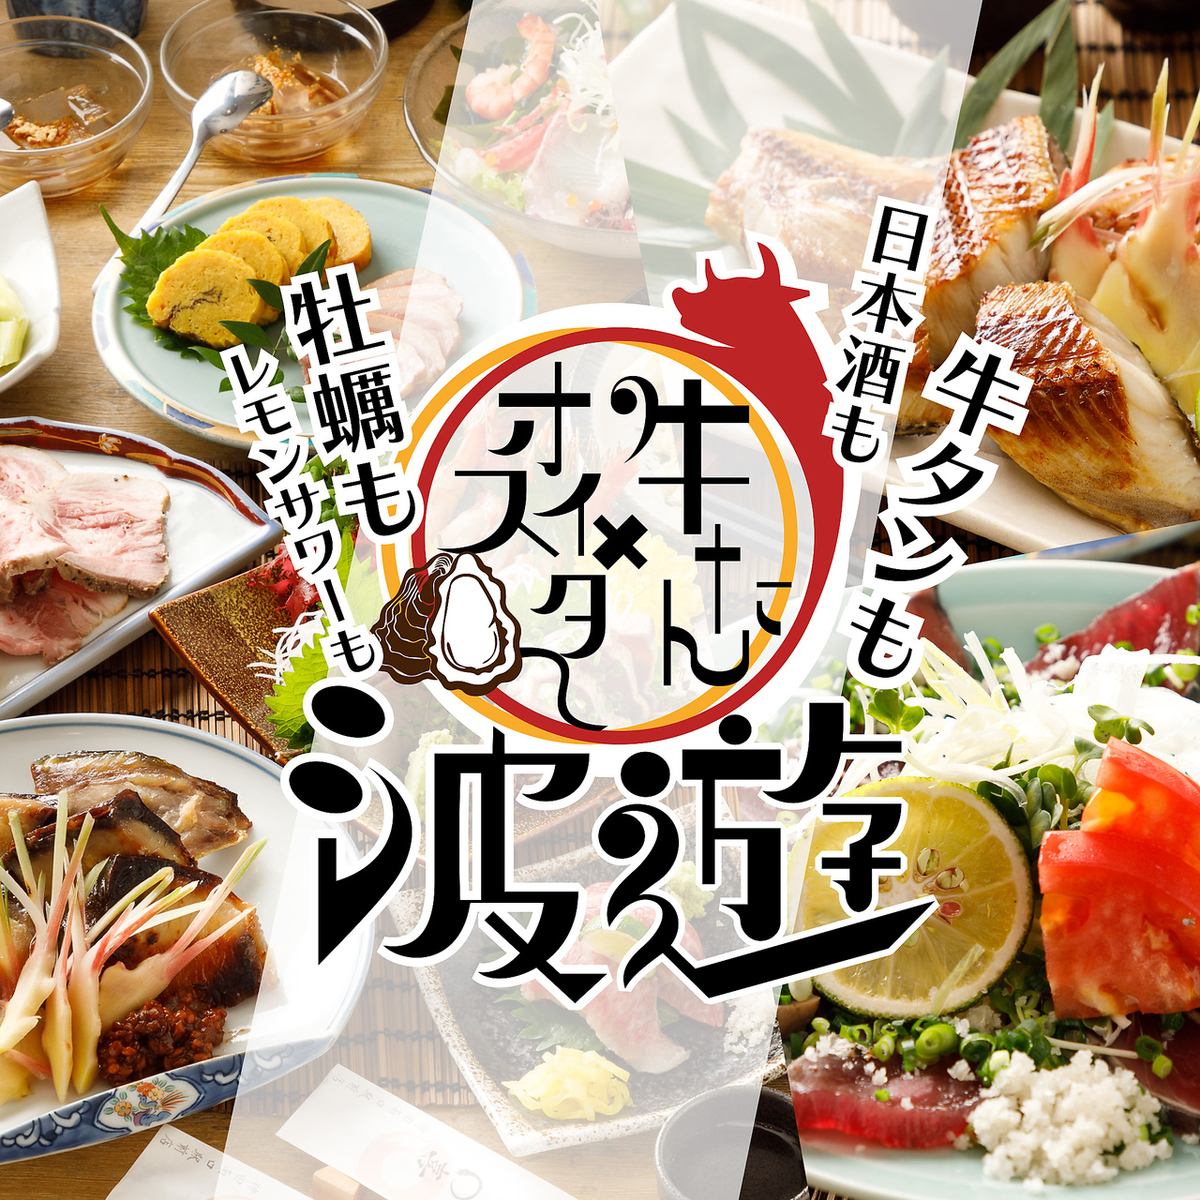 Oysters, beef tongue, carefully selected sake, and [3 hours with draft beer] The all-you-can-drink course starts at 3,000 yen!